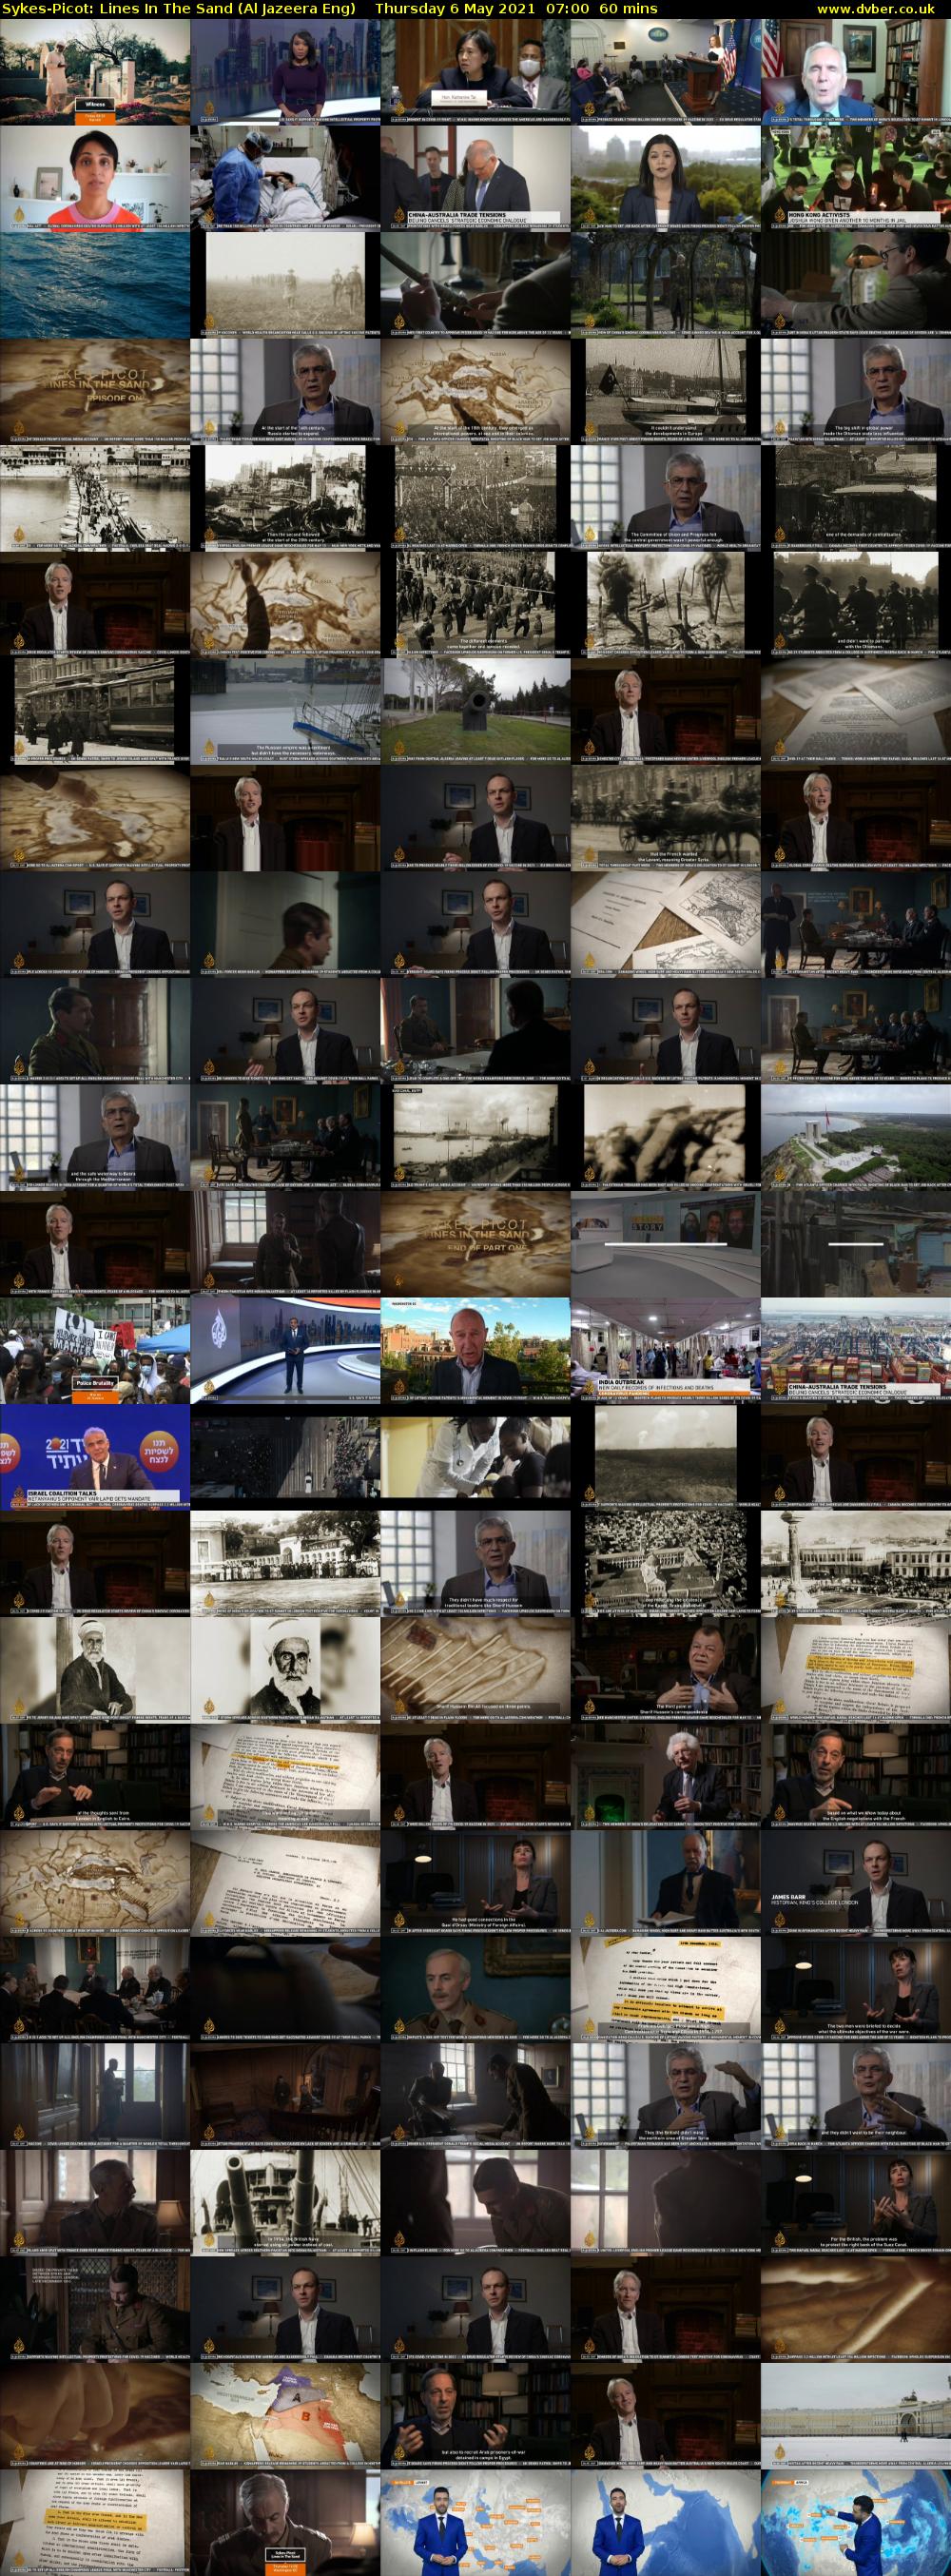 Sykes-Picot: Lines In The Sand (Al Jazeera Eng) Thursday 6 May 2021 07:00 - 08:00